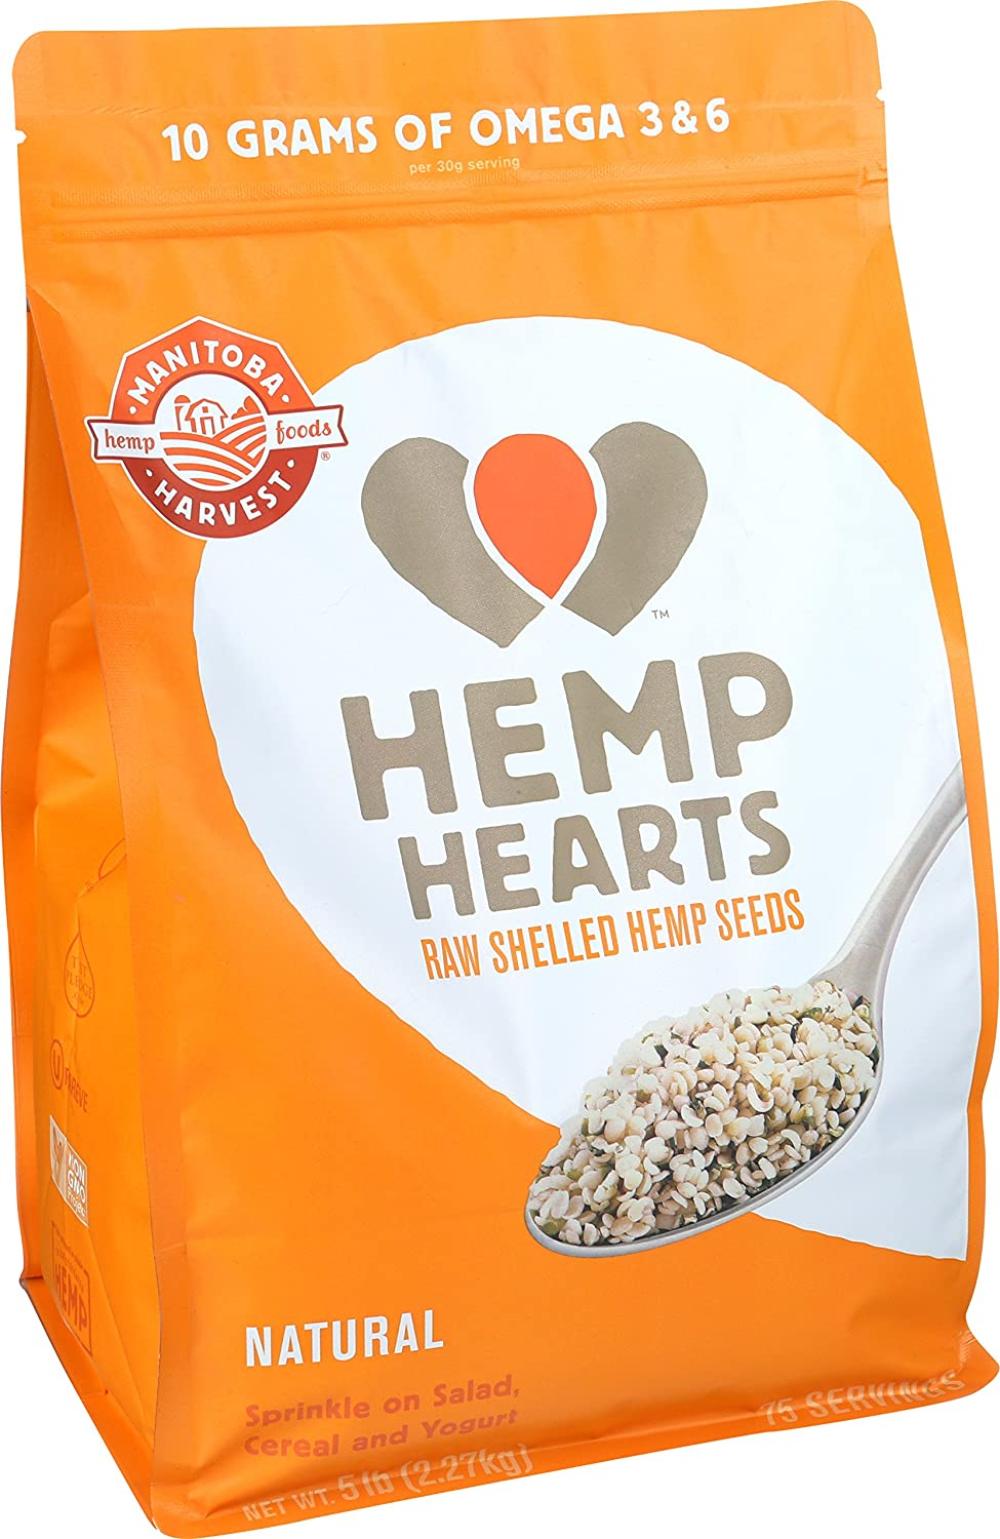 MANITOBA HARVEST HEMP HEART RAW SHLD SEEDS , It is a high quality healthy product By Visit the Manitoba Harvest Store